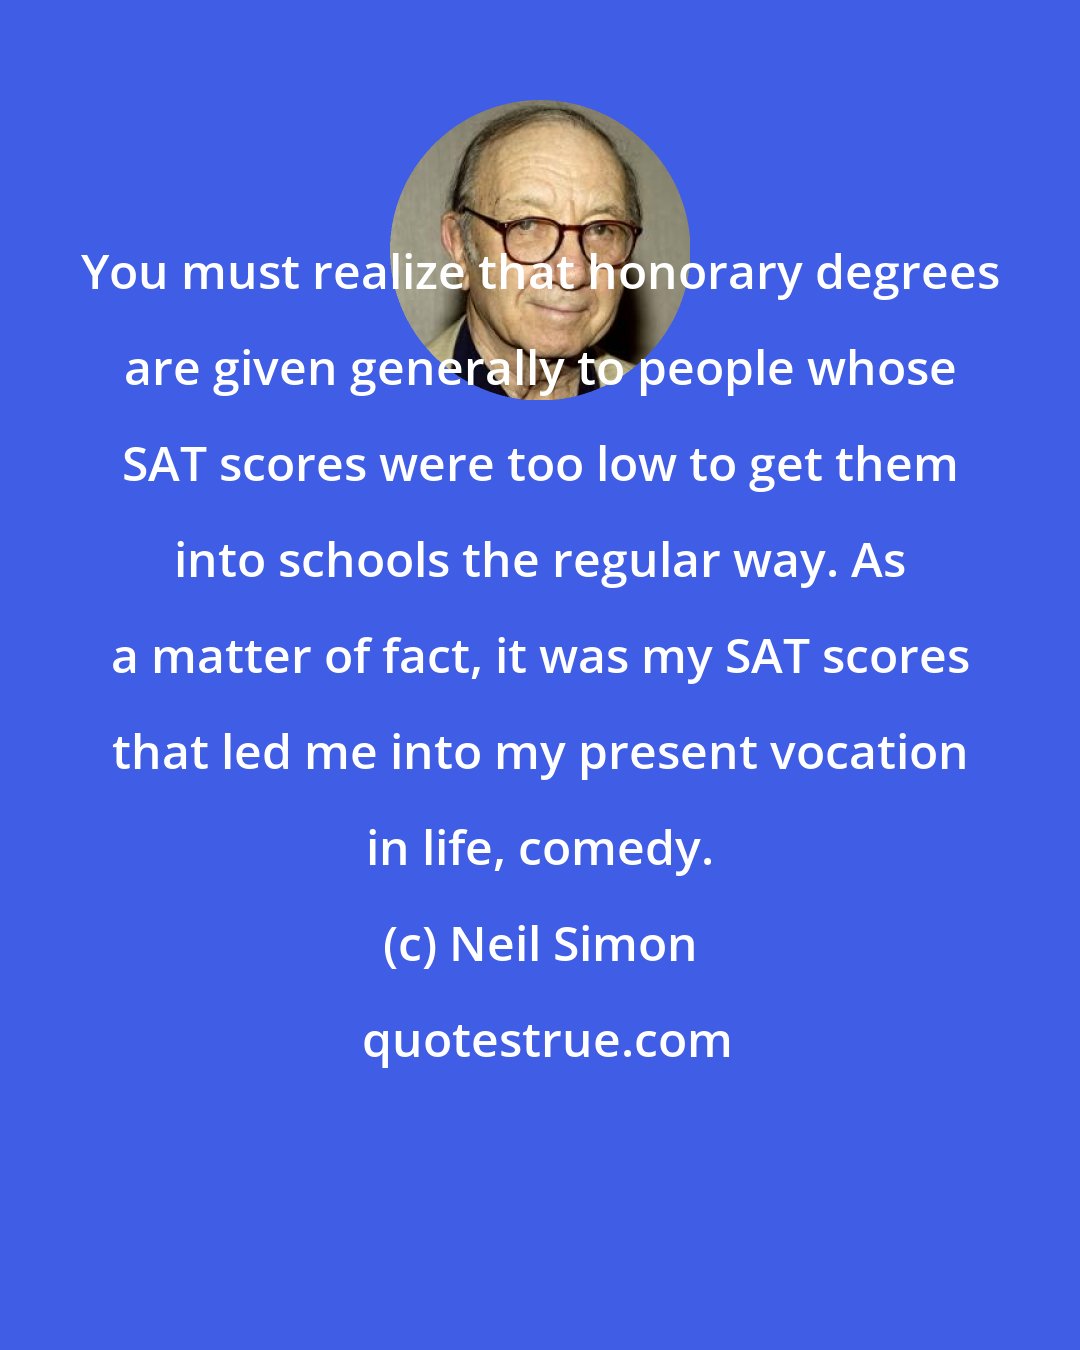 Neil Simon: You must realize that honorary degrees are given generally to people whose SAT scores were too low to get them into schools the regular way. As a matter of fact, it was my SAT scores that led me into my present vocation in life, comedy.